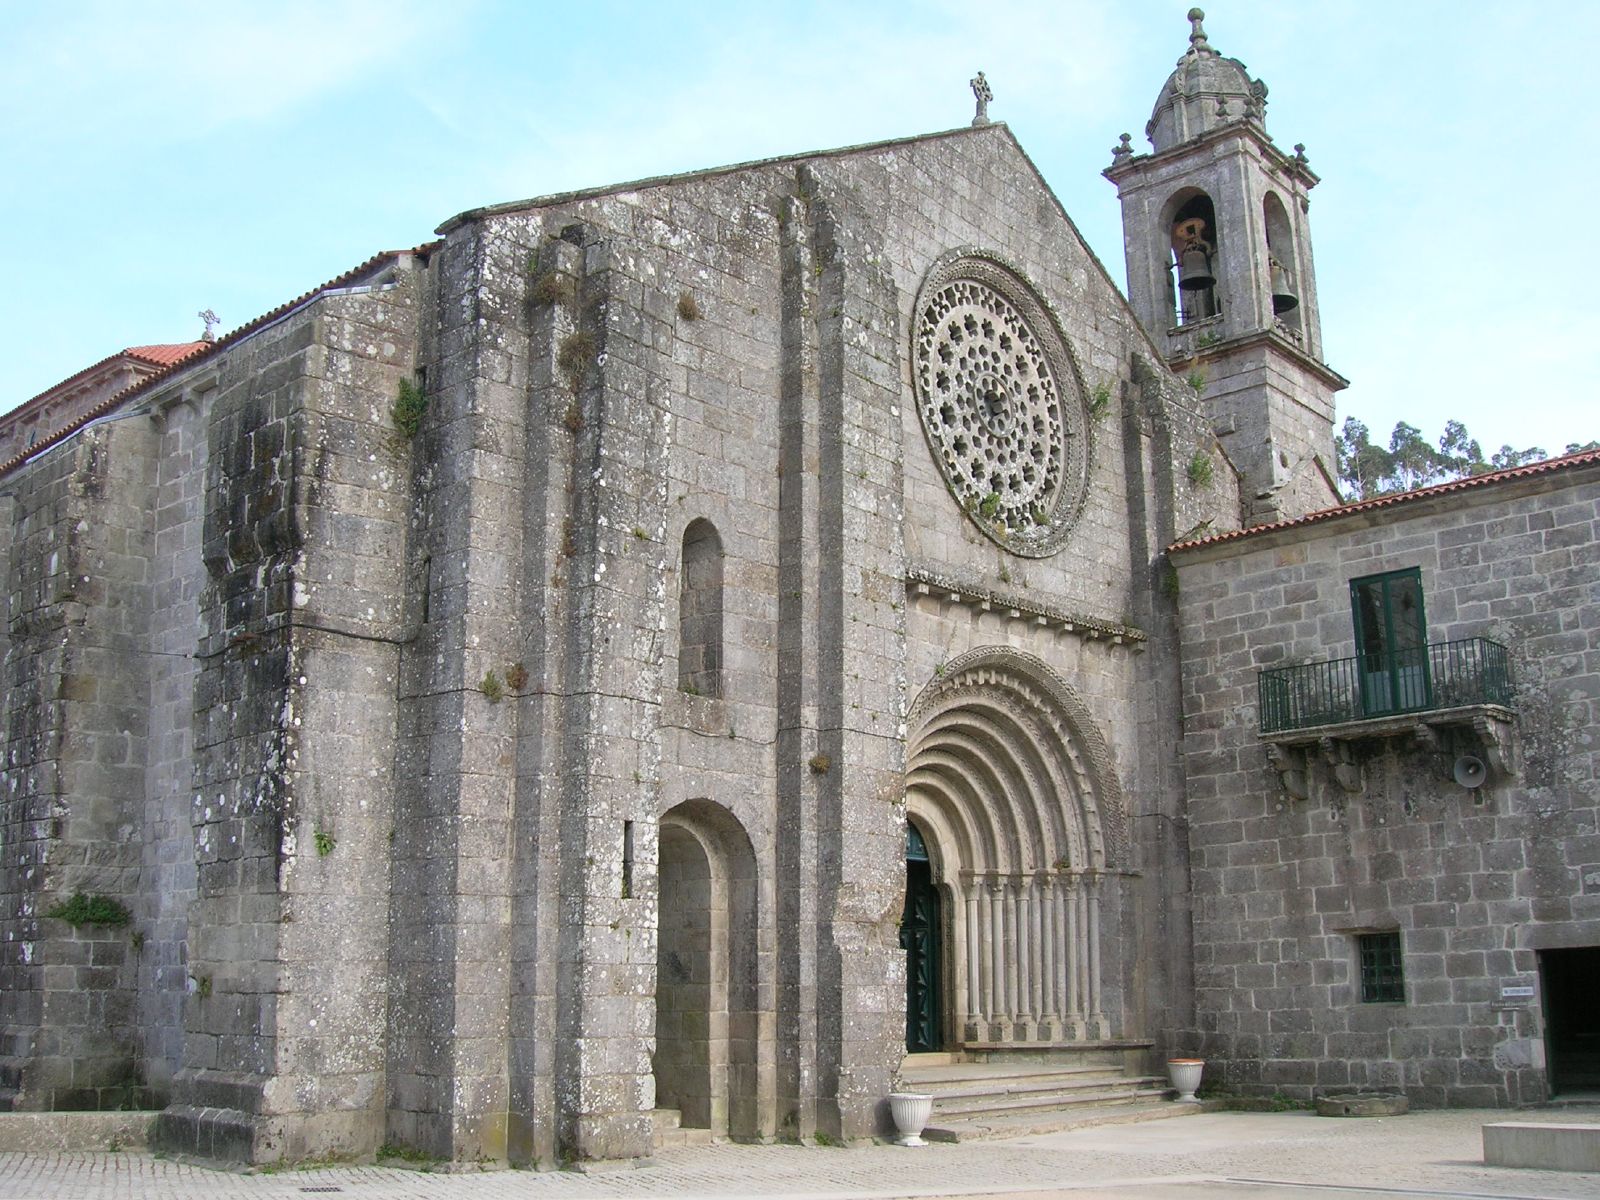 a old church is shown with an artistic design on the front